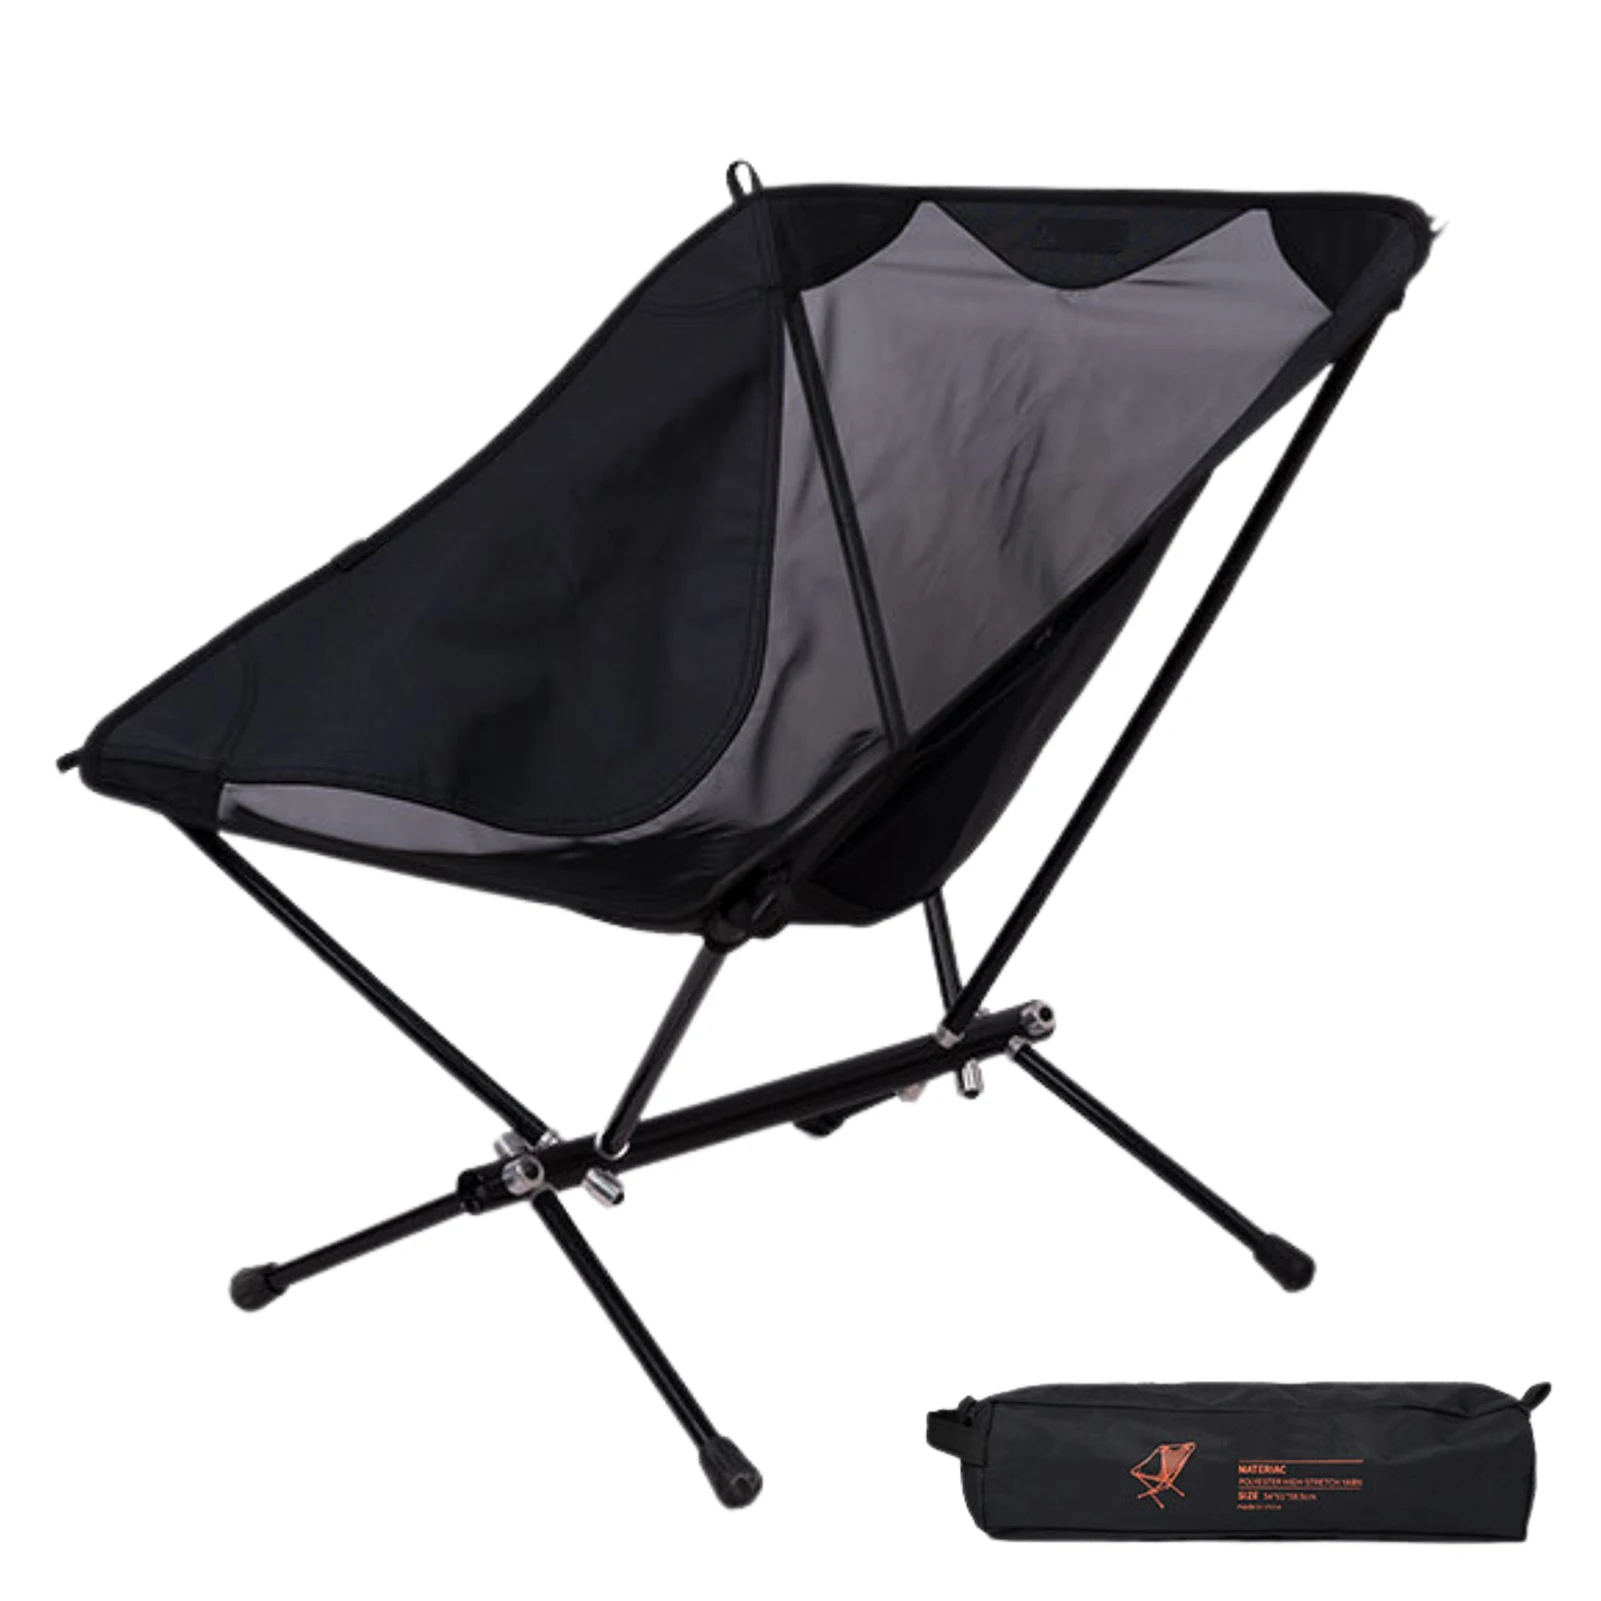 

Folding Chairs For Outside Lightweight Camping Chair Portable Compact Chairs Collapsible Backpack Chair For Outdoor Camp Picnic